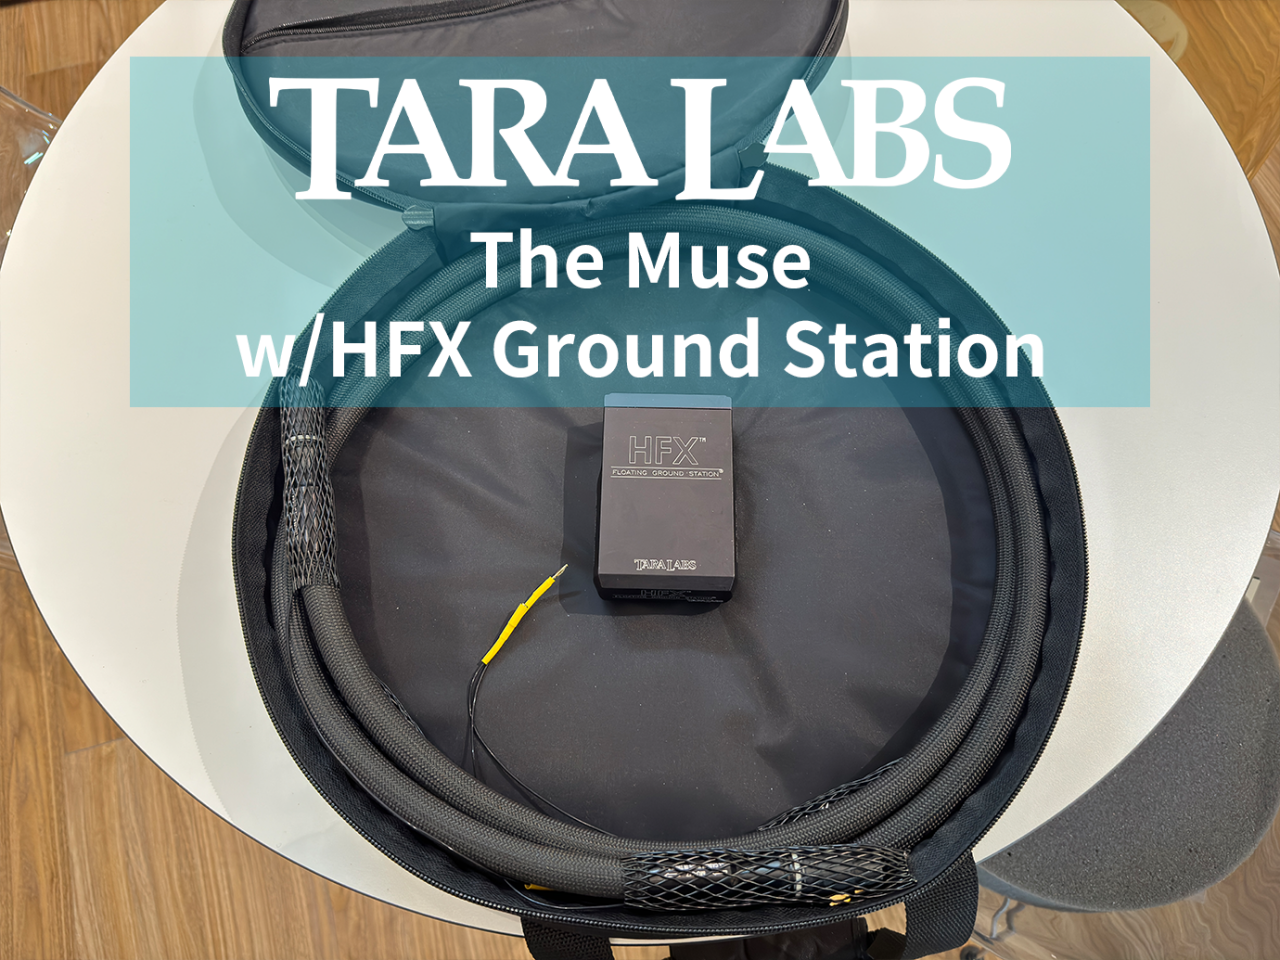 TaraLabs The Muse w/HFX Ground Station(타라랩 더 뮤즈 그라운드 스테이션) 입고